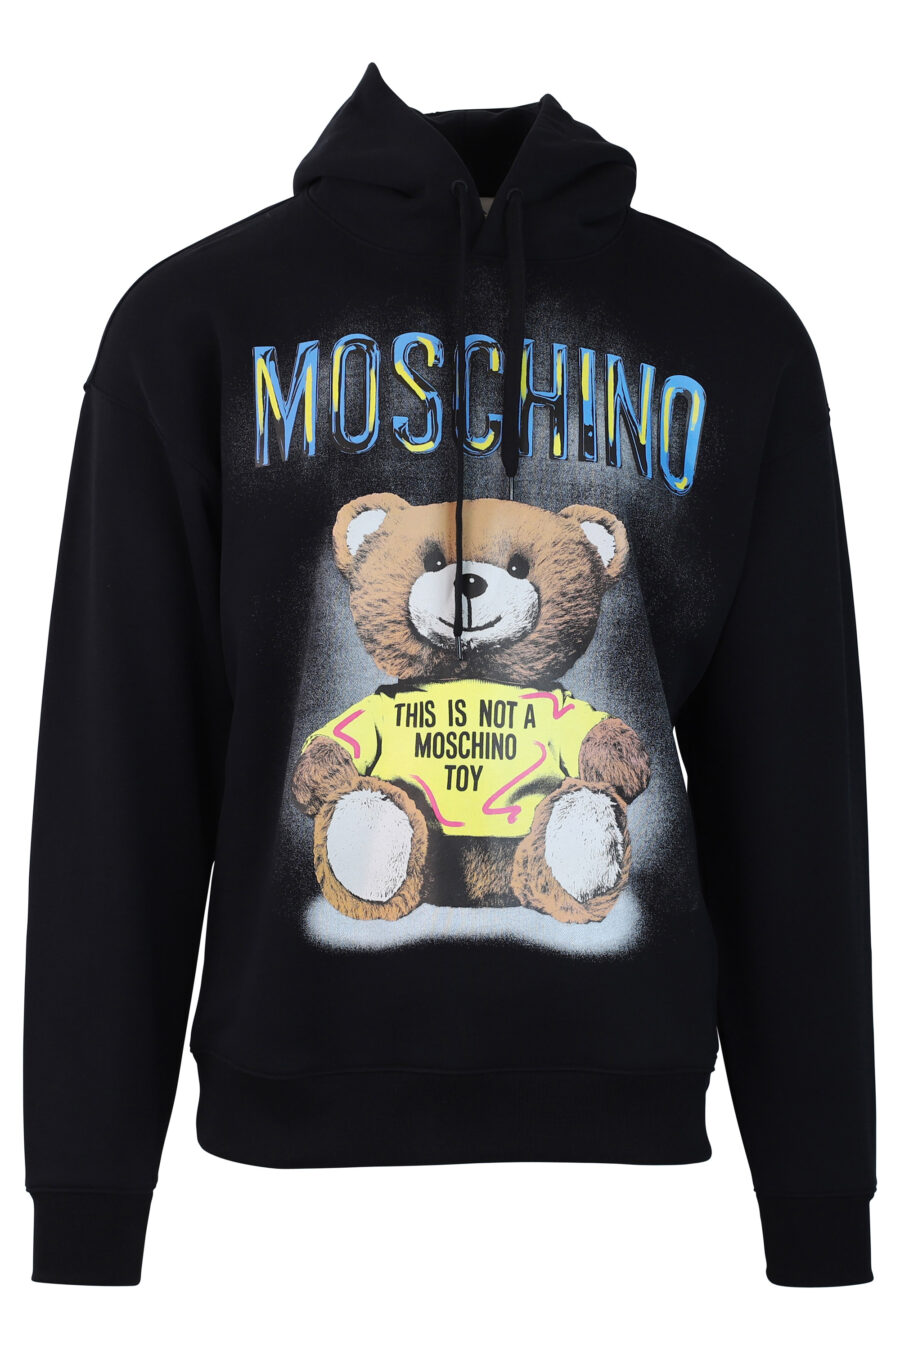 Sudadera negra con capucha y maxilogo "this is not a moschino toy" - IMG 0709